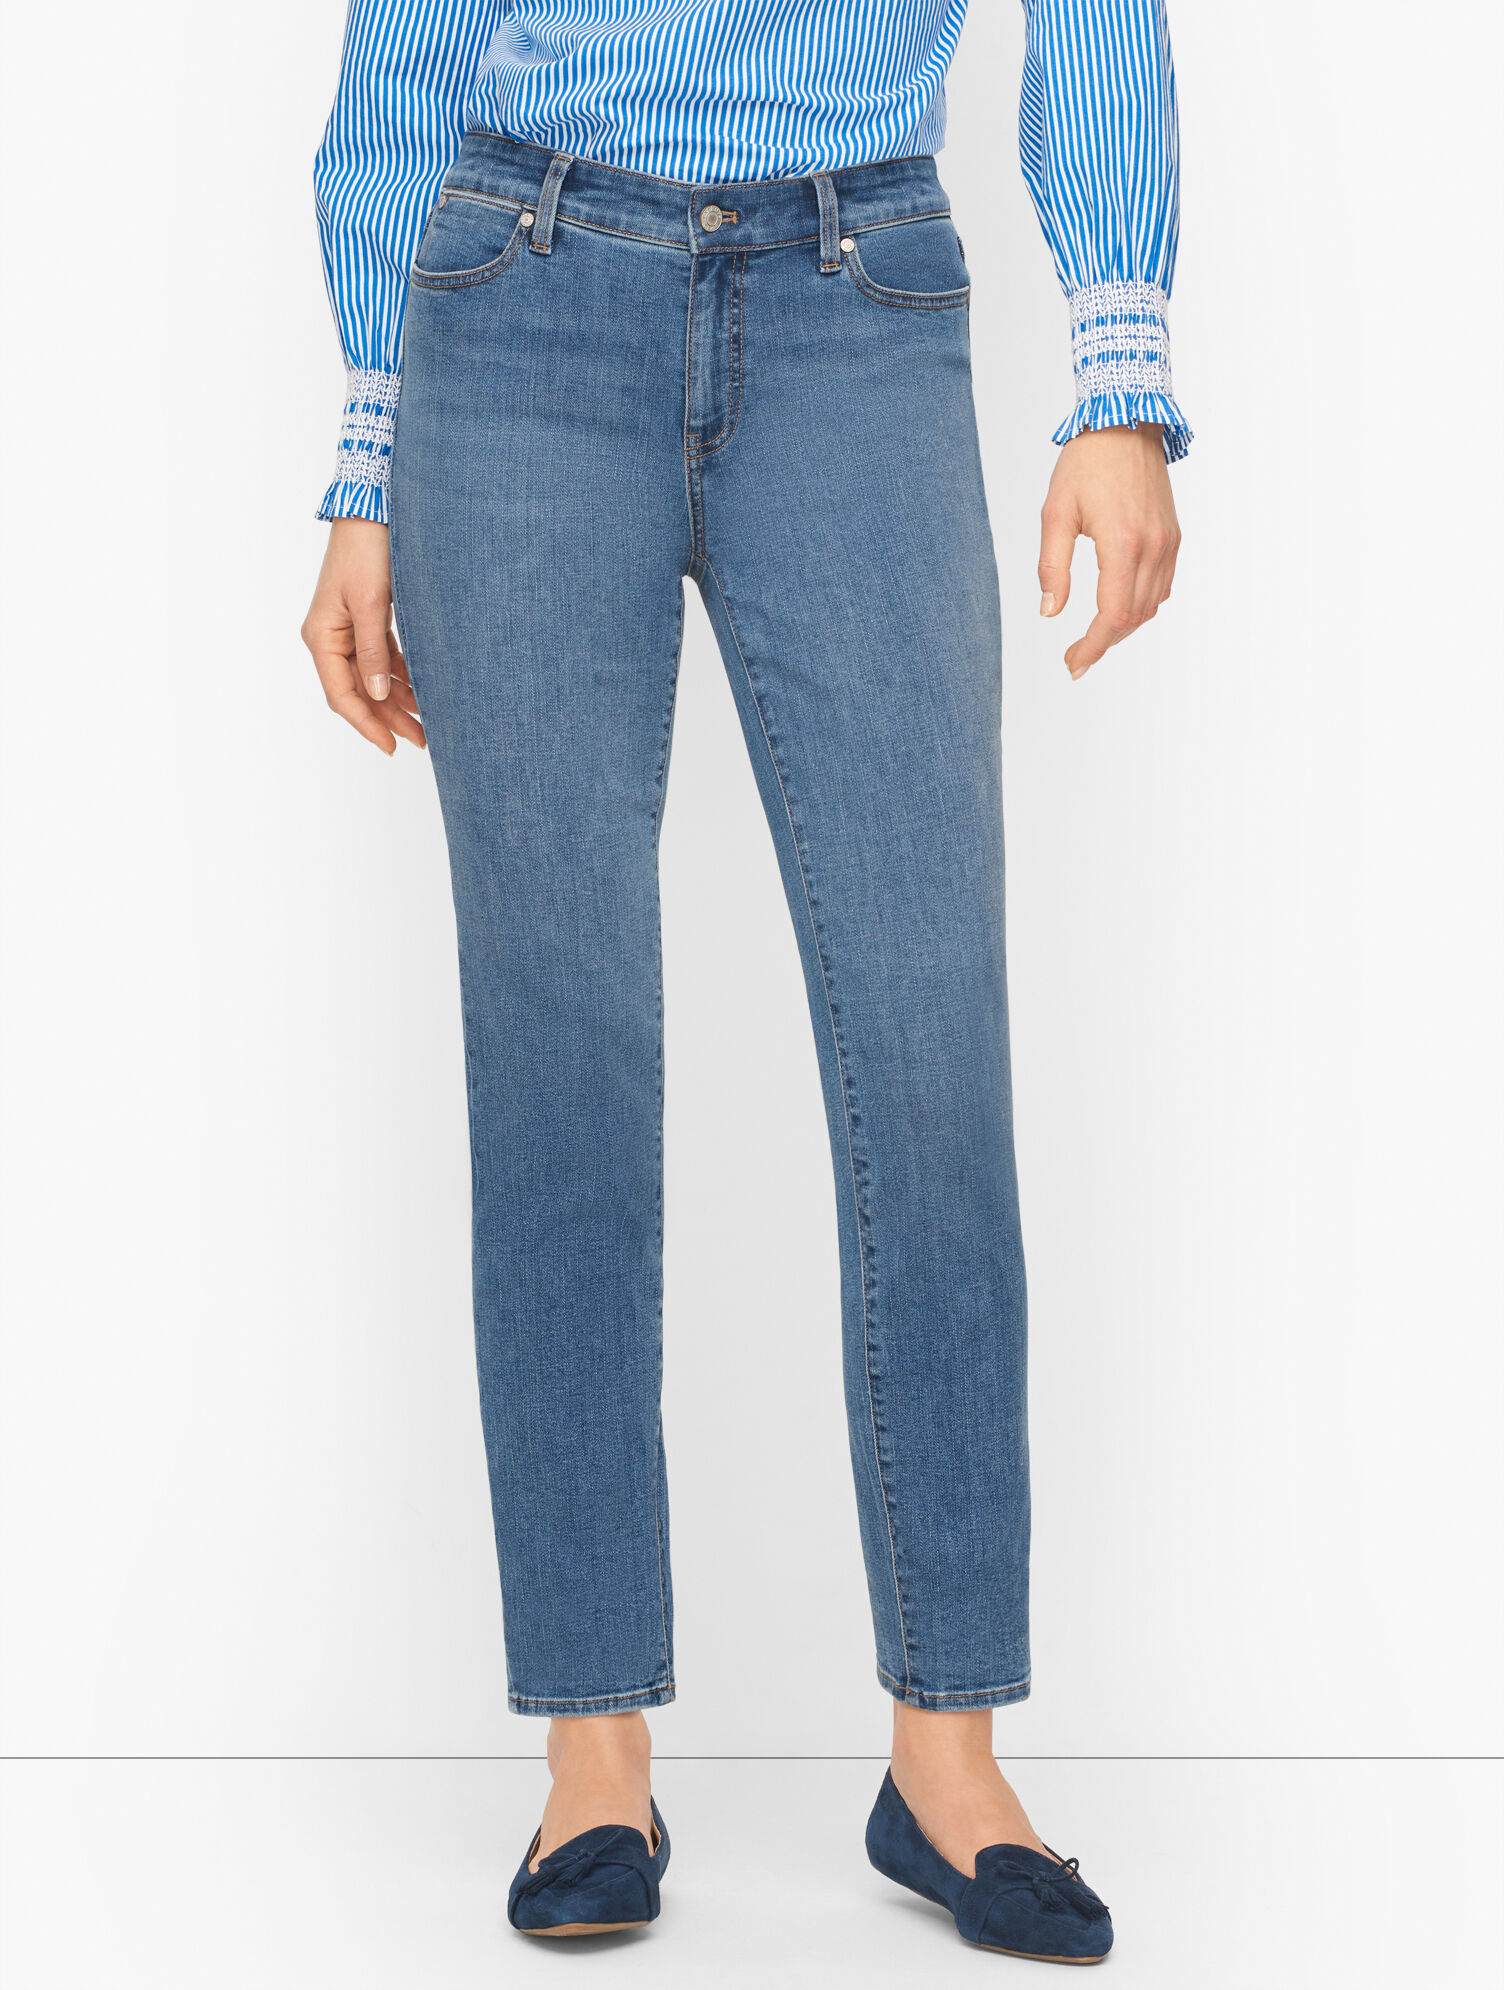 Slim Ankle Jeans - Rio Wash - Curvy Fit